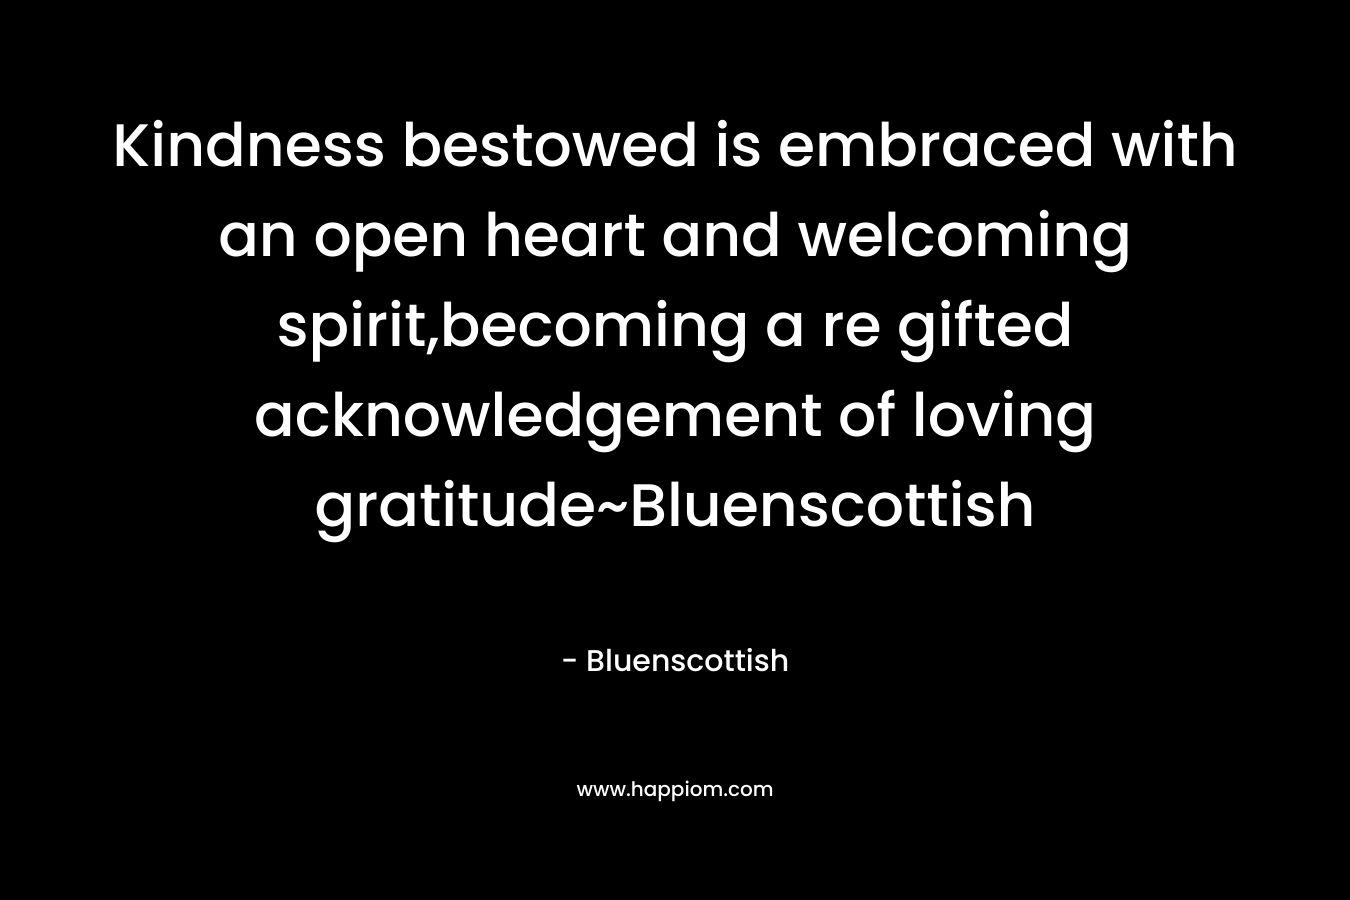 Kindness bestowed is embraced with an open heart and welcoming spirit,becoming a re gifted acknowledgement of loving gratitude~Bluenscottish